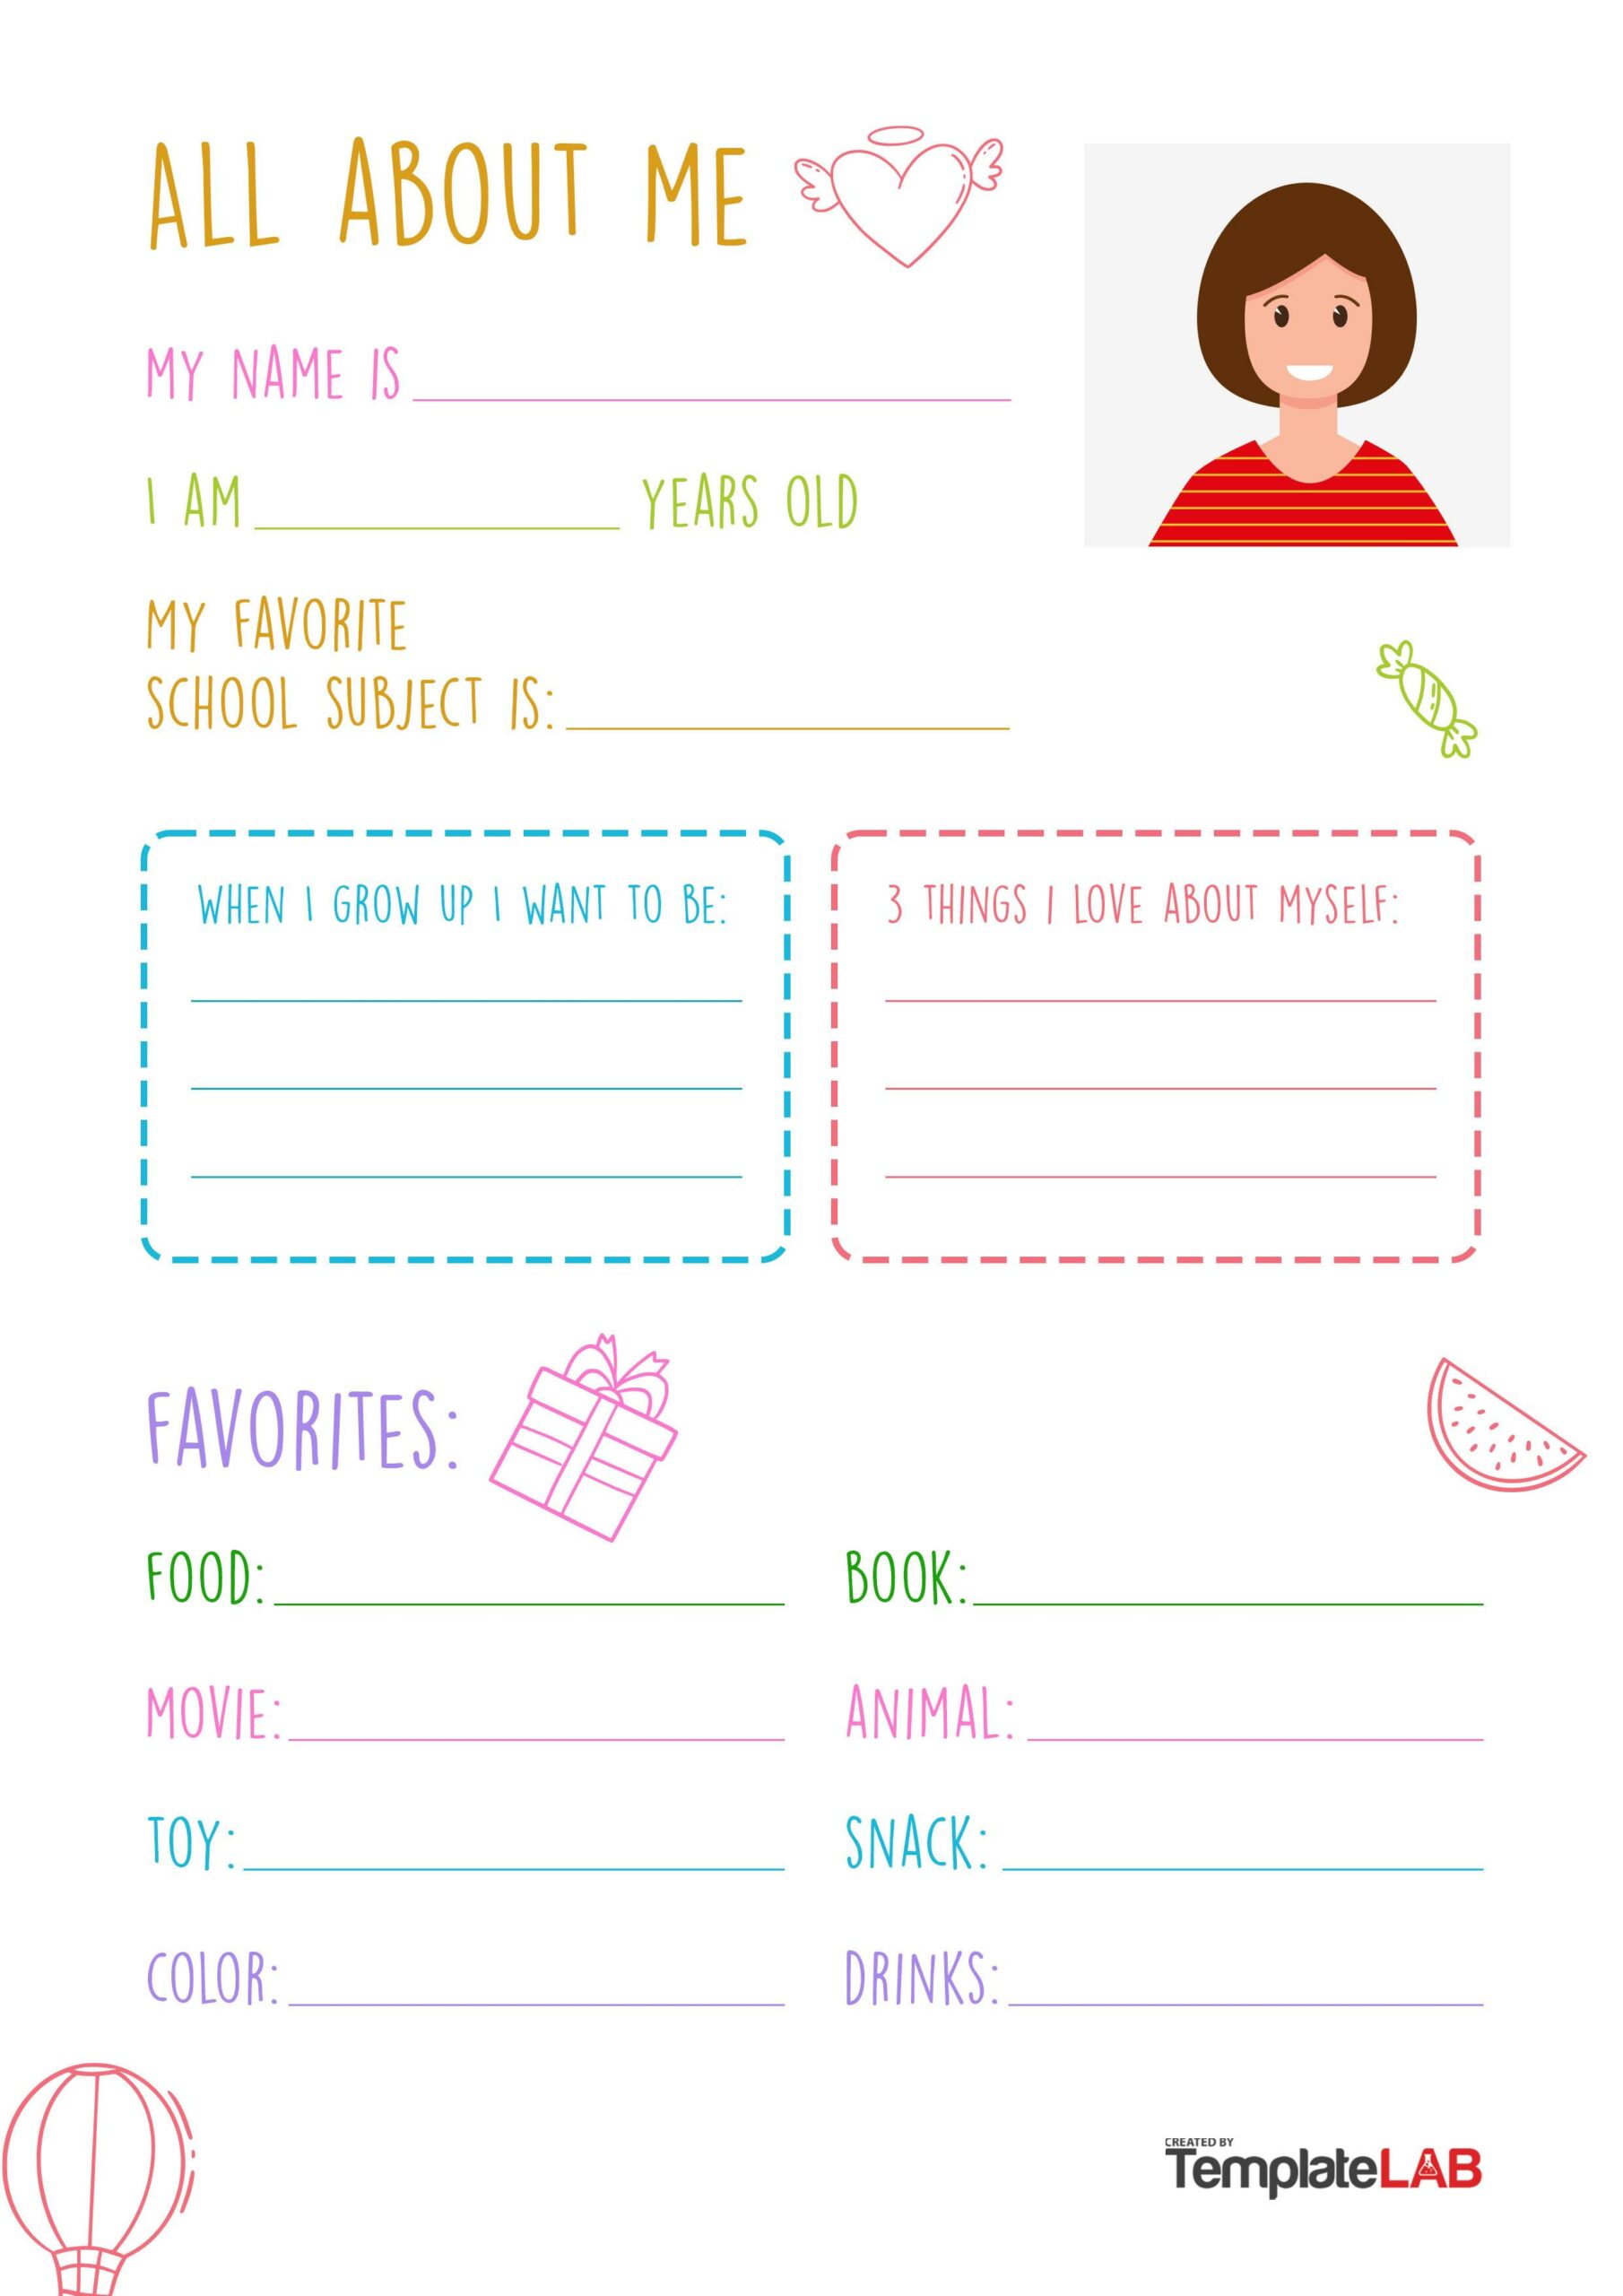 Free All About Me Preschool Template  V2